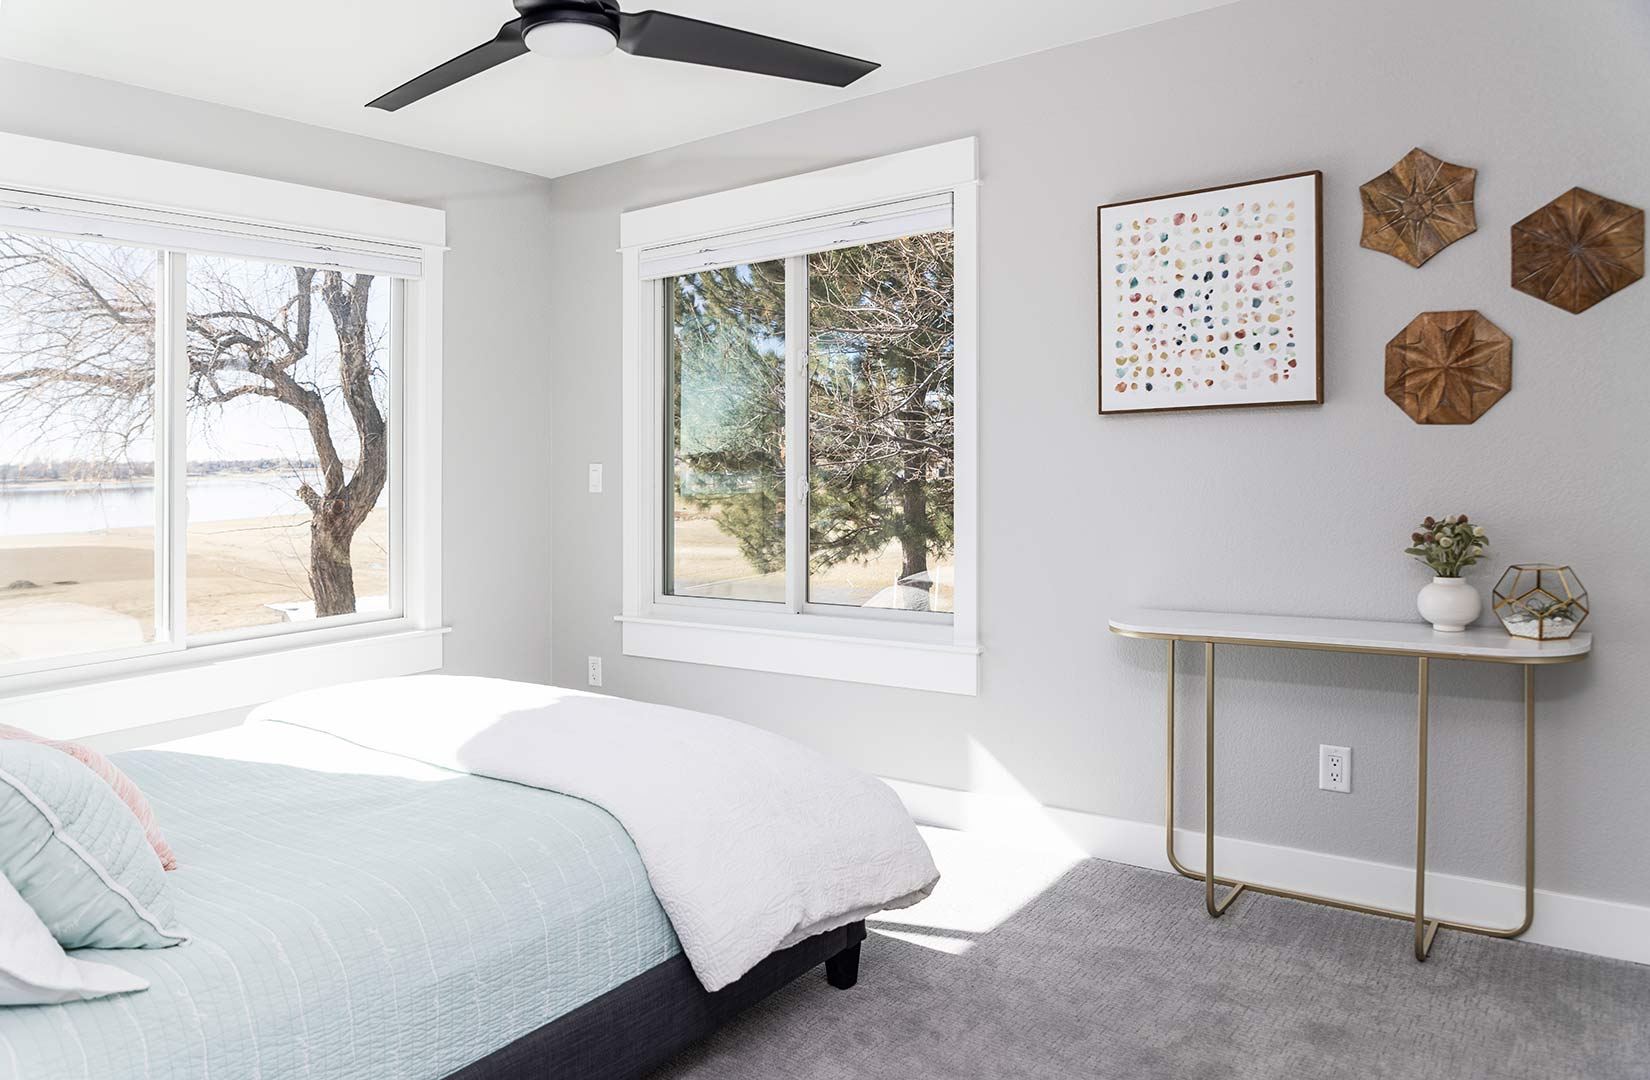 Main bedroom of Janna Drive Project that is styled by Freestone Design-Build.